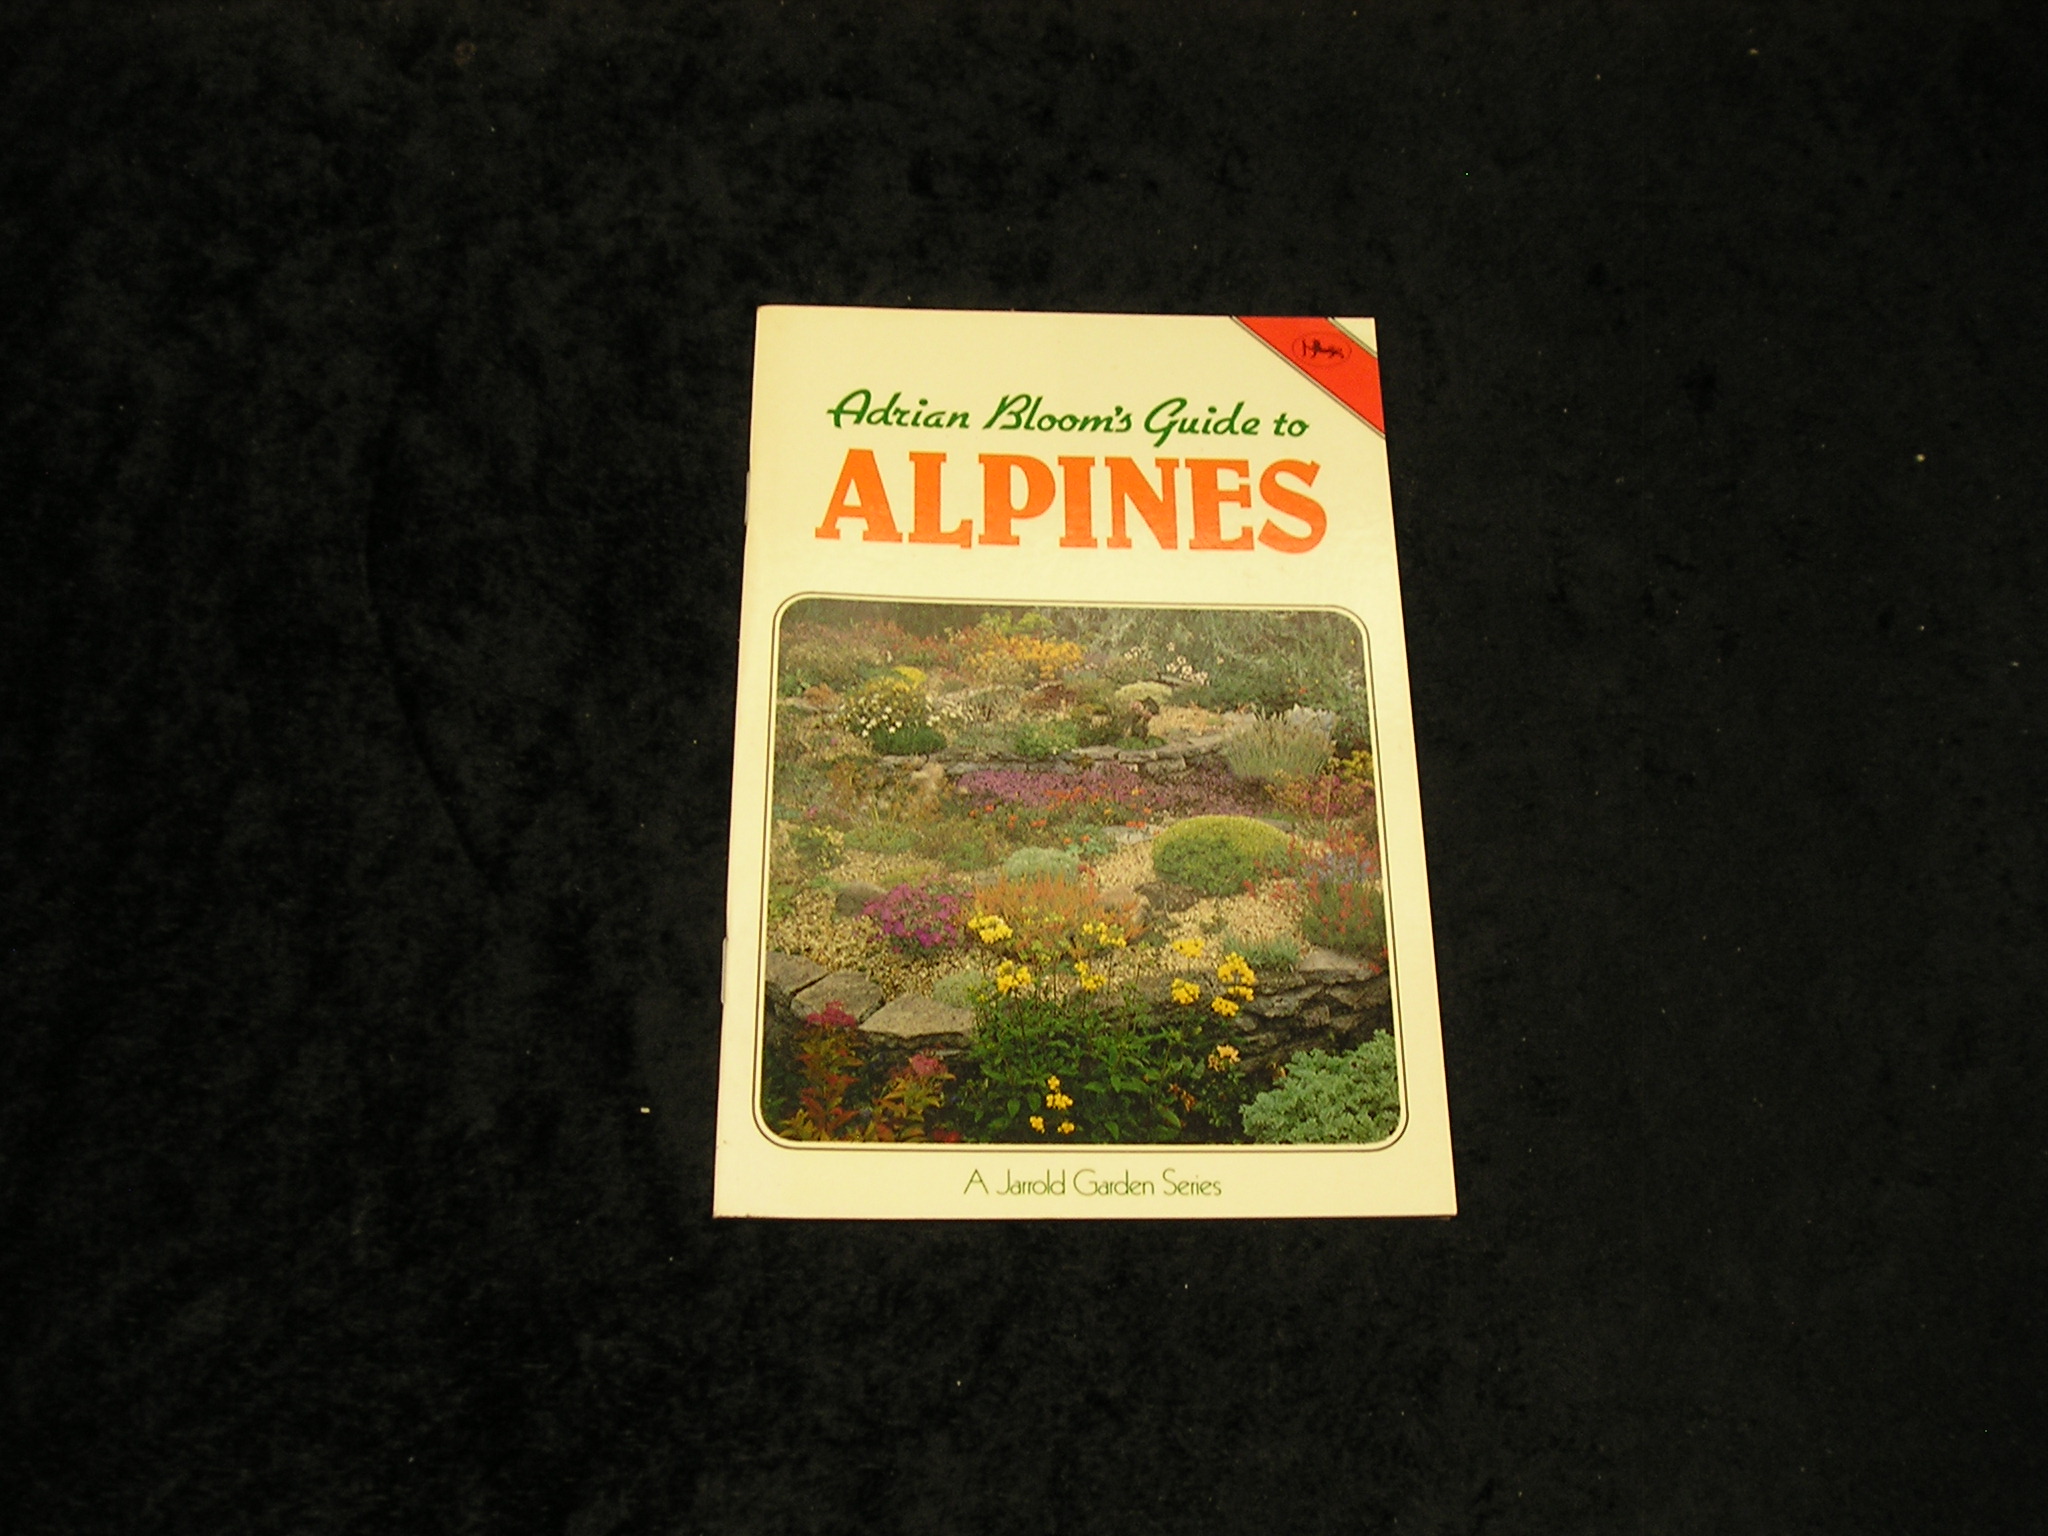 Adrian Bloom's Guide to Alpines